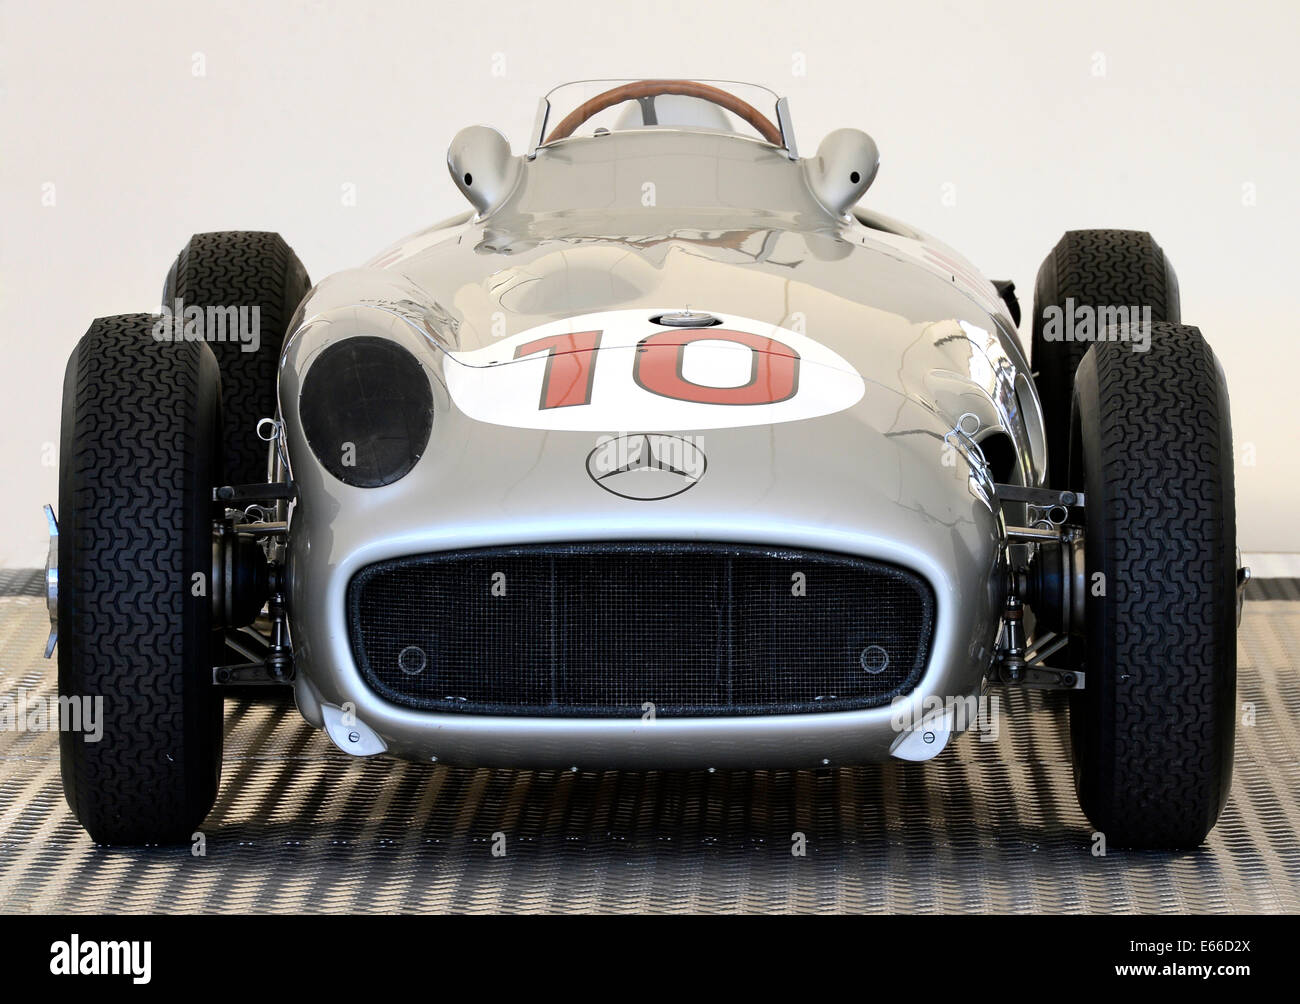 1954 Mercedes-Benz  W196 F1 racing car on display at the 2013 Carfest South. Stock Photo